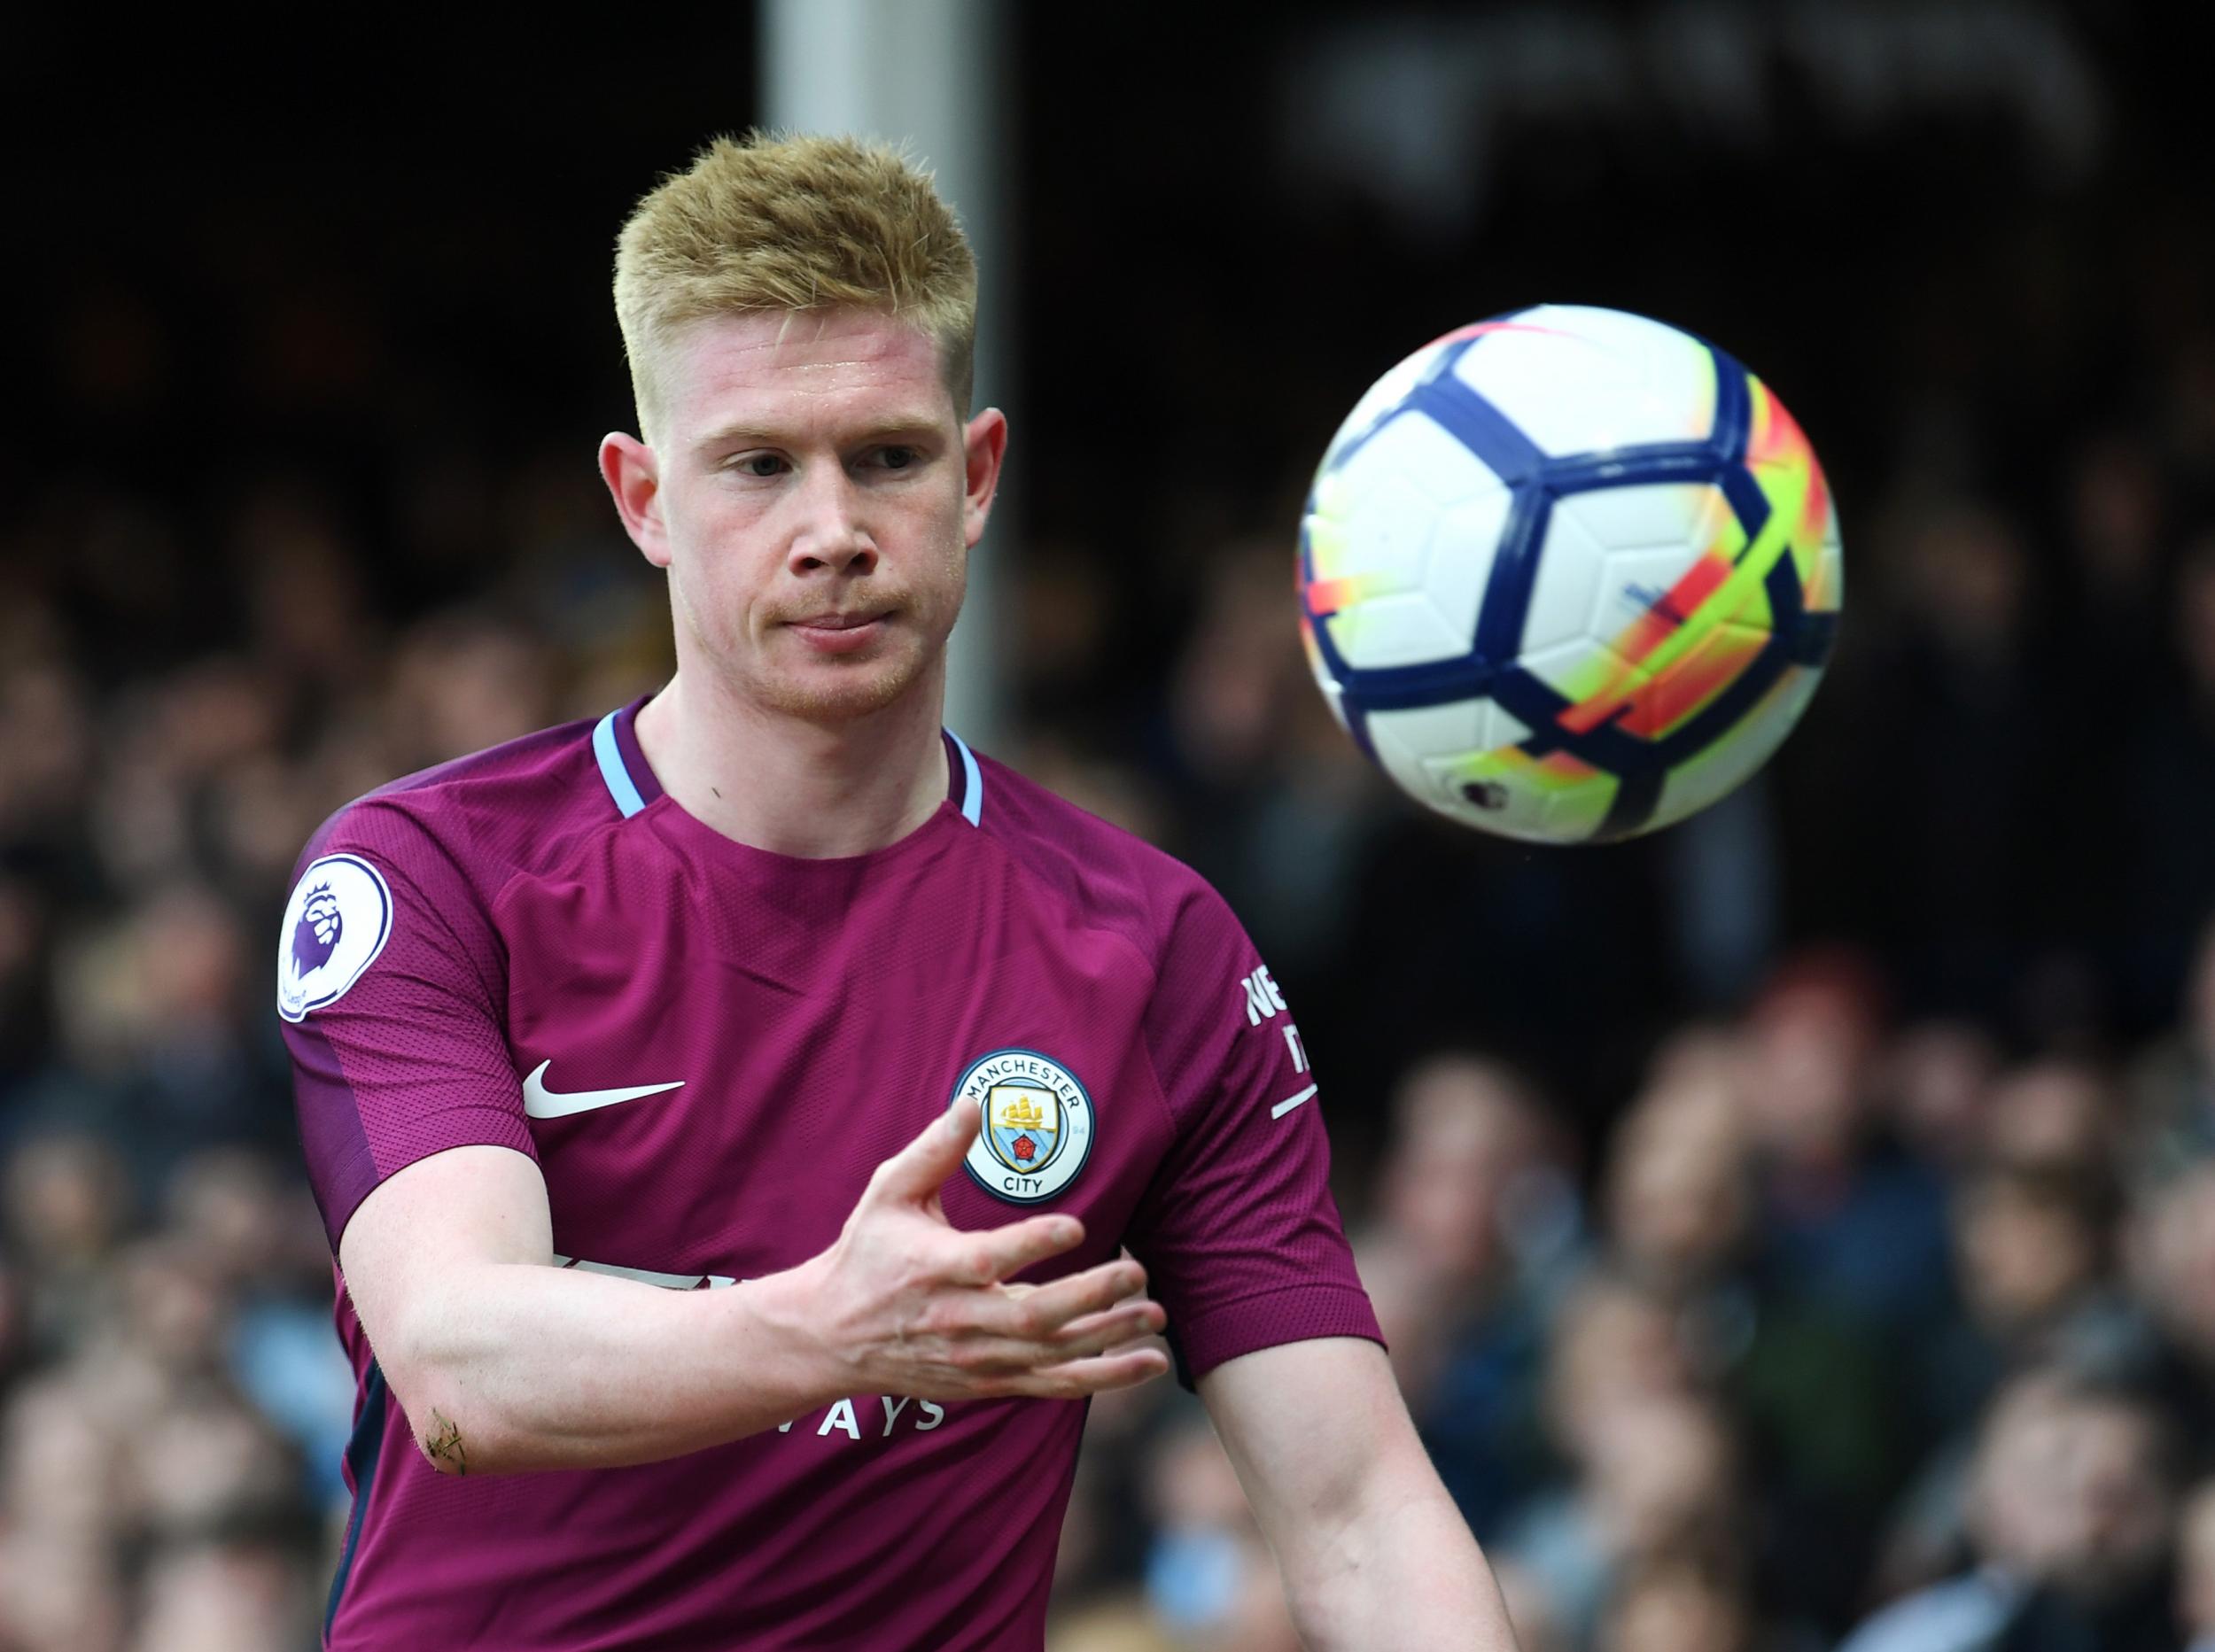 De Bruyne is still the favourite to pick up the award